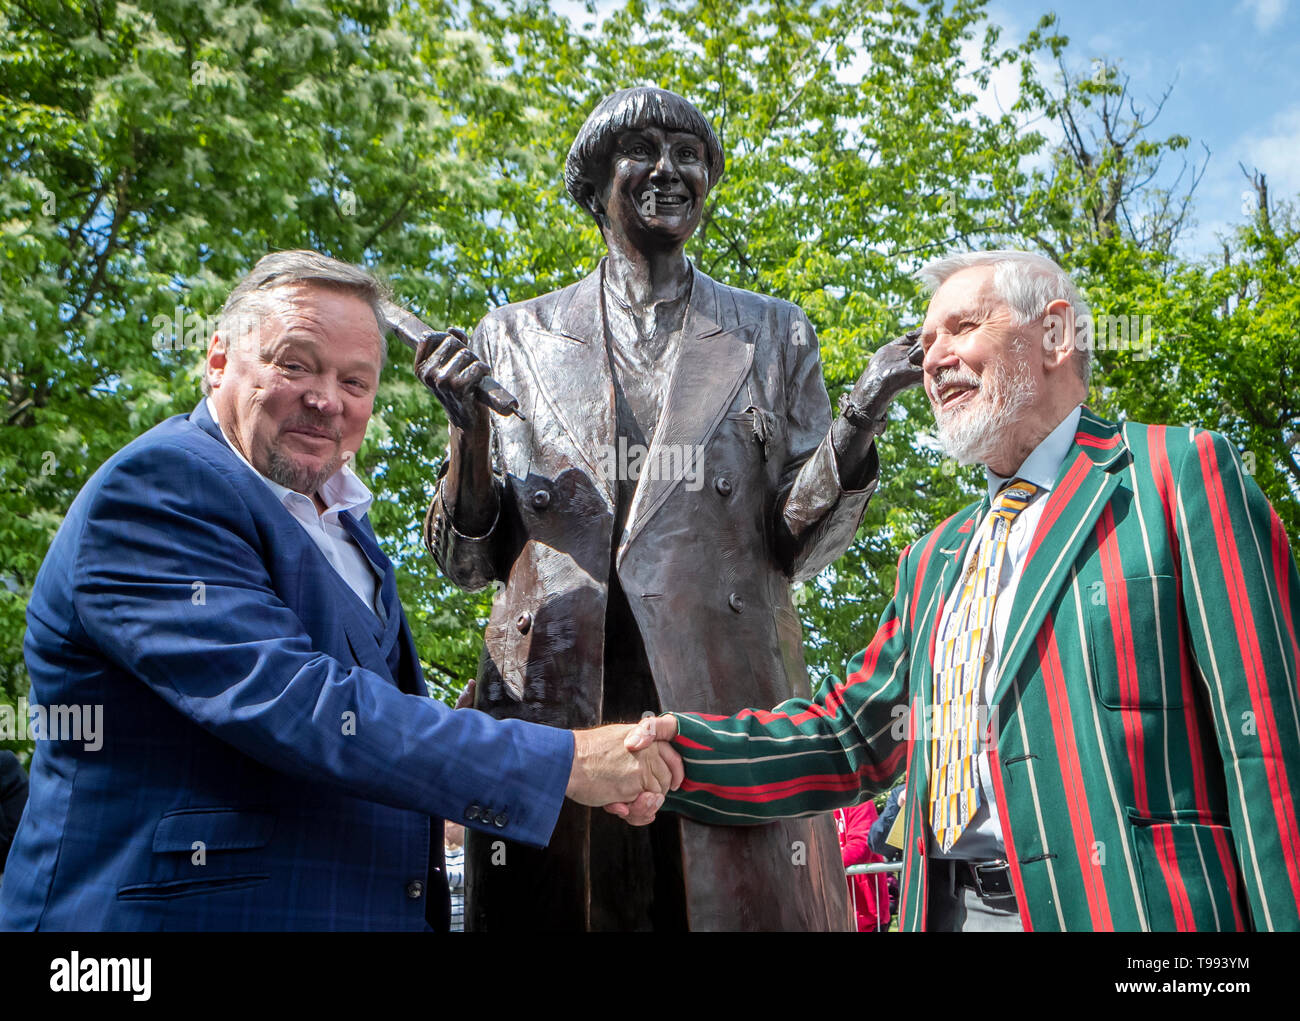 A life-size bronze statue of the late comedian, writer and actor, Victoria Wood is unveiled in Bury town centre by comedian Ted Robbins (left) and her brother Chris Foote Wood. Stock Photo